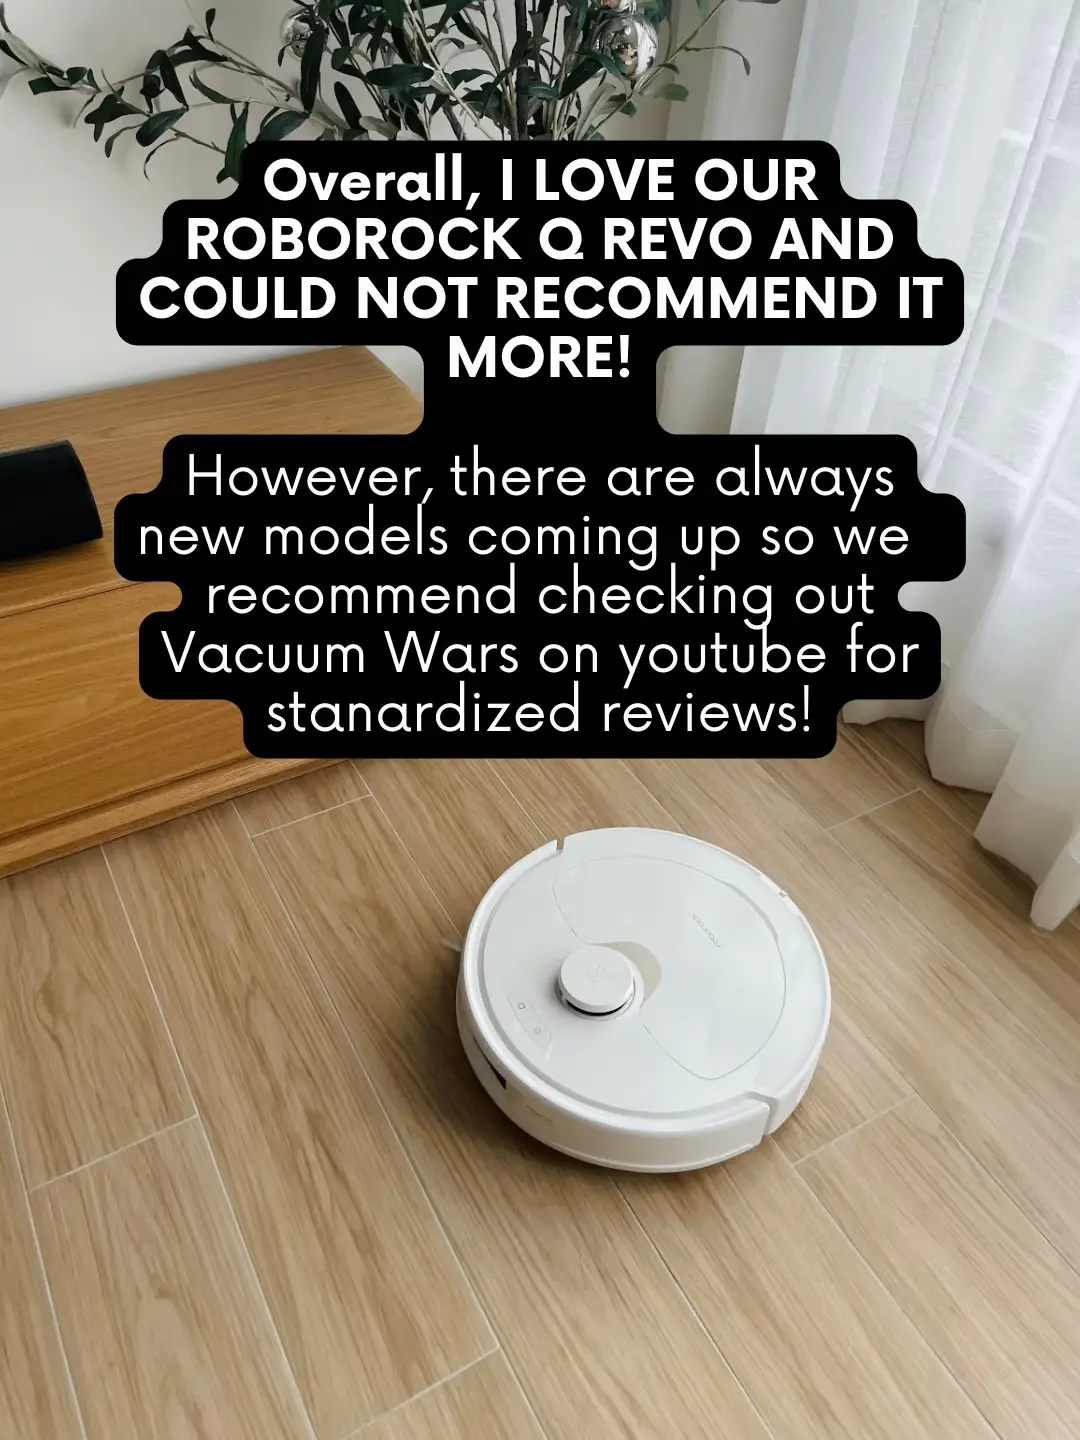 Roborock S7 MaxV Ultra Review - 6 Months Later 